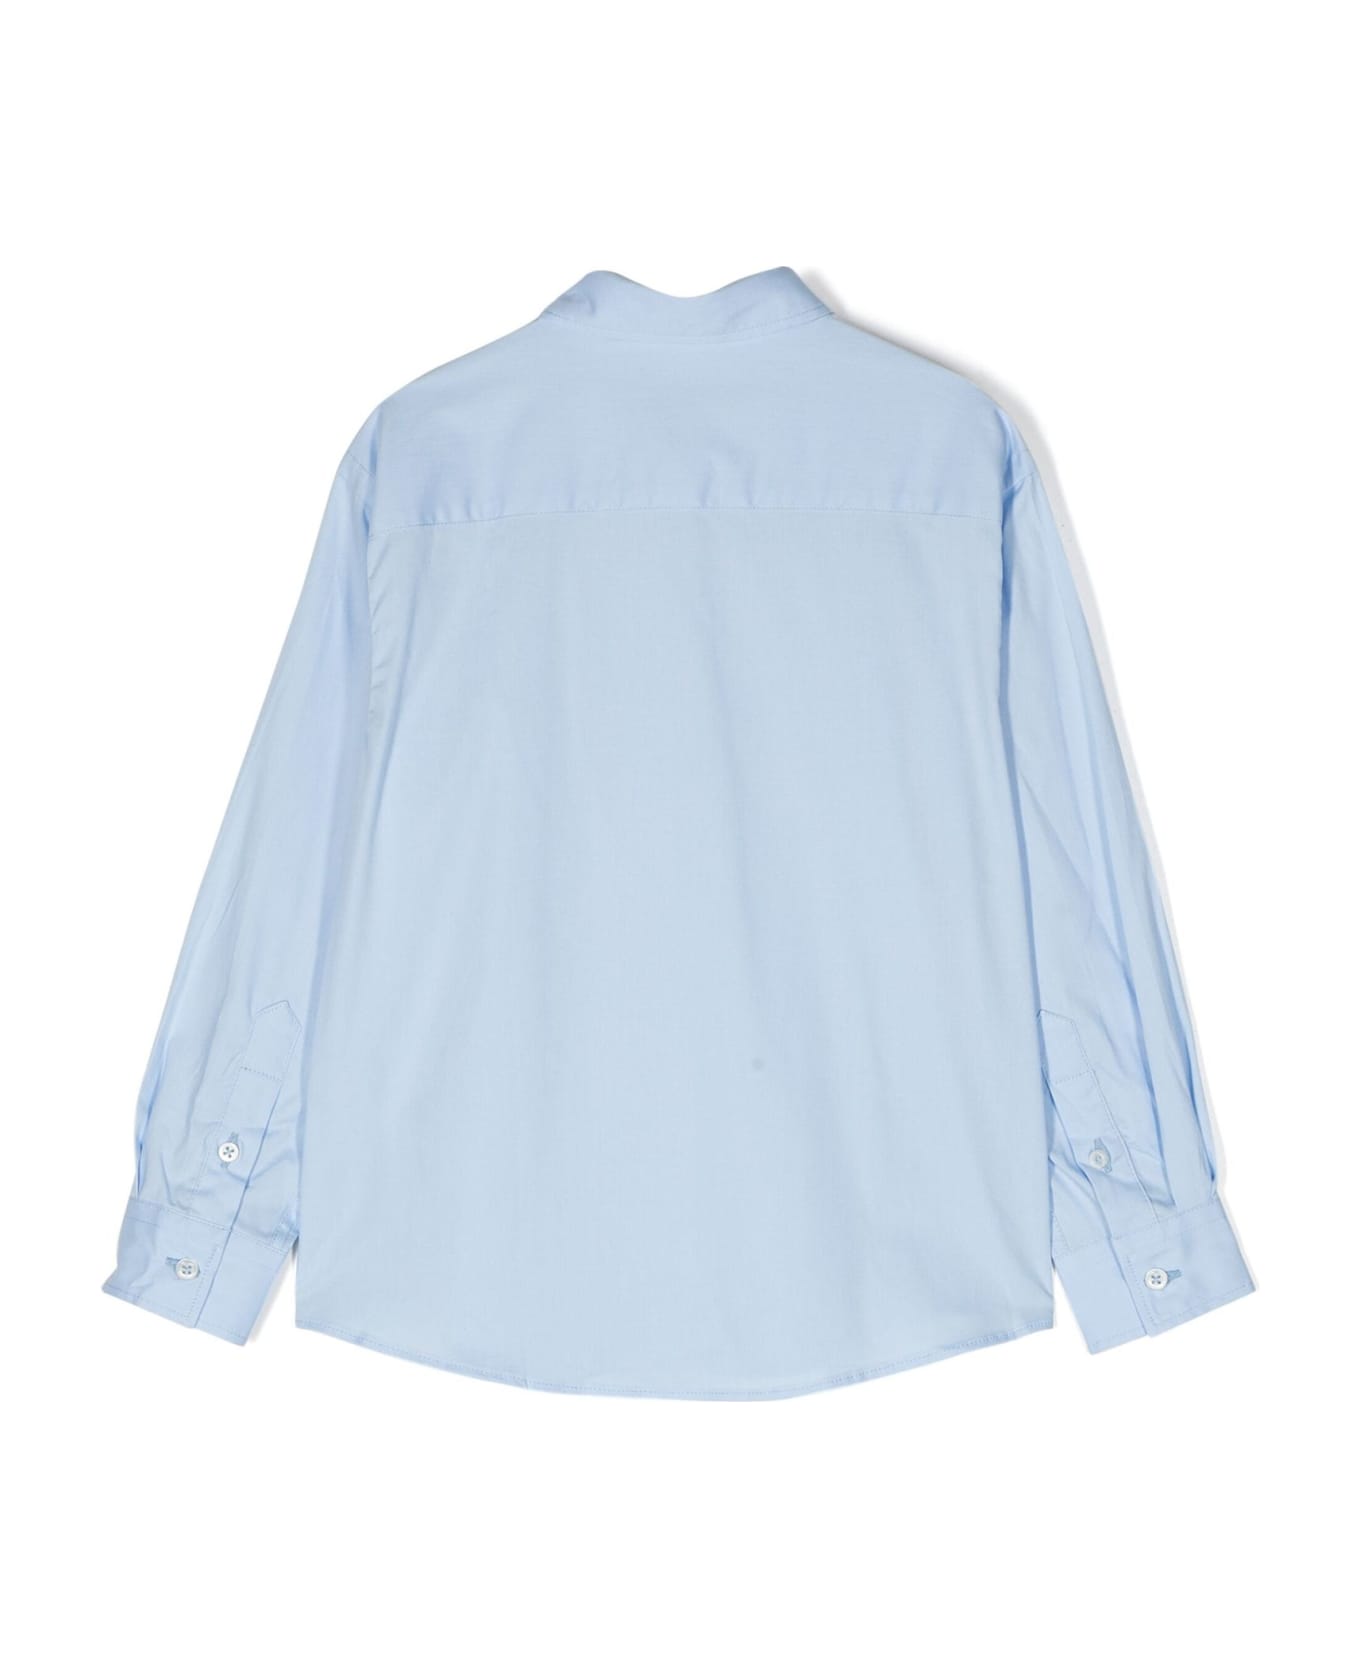 Paolo Pecora Shirts Clear Blue - Clear Blue シャツ